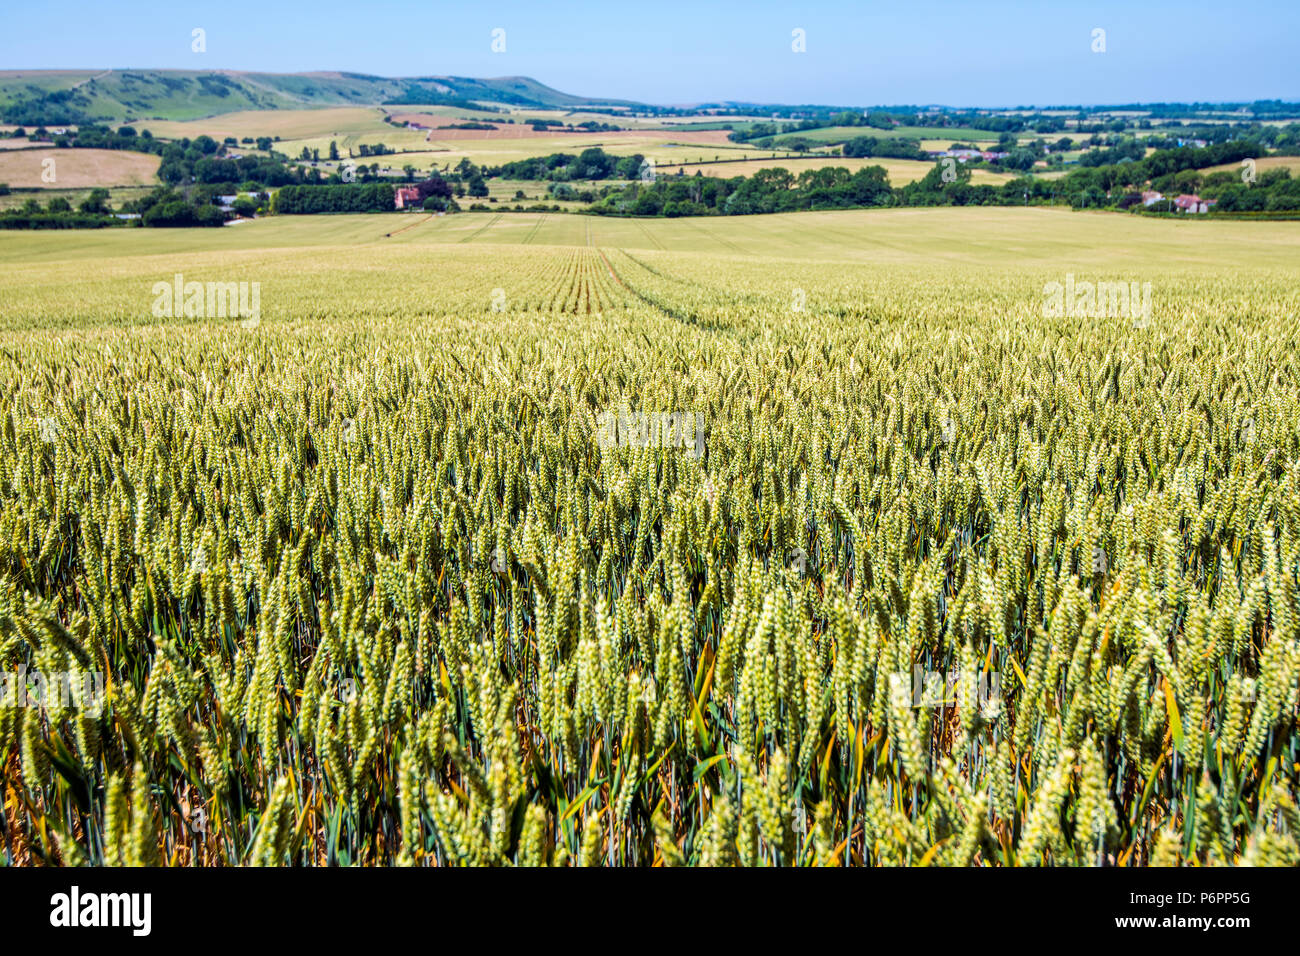 View towards Firle Beacon from Jevington in East Sussex, England, showing a beautiful farming landscape. Stock Photo